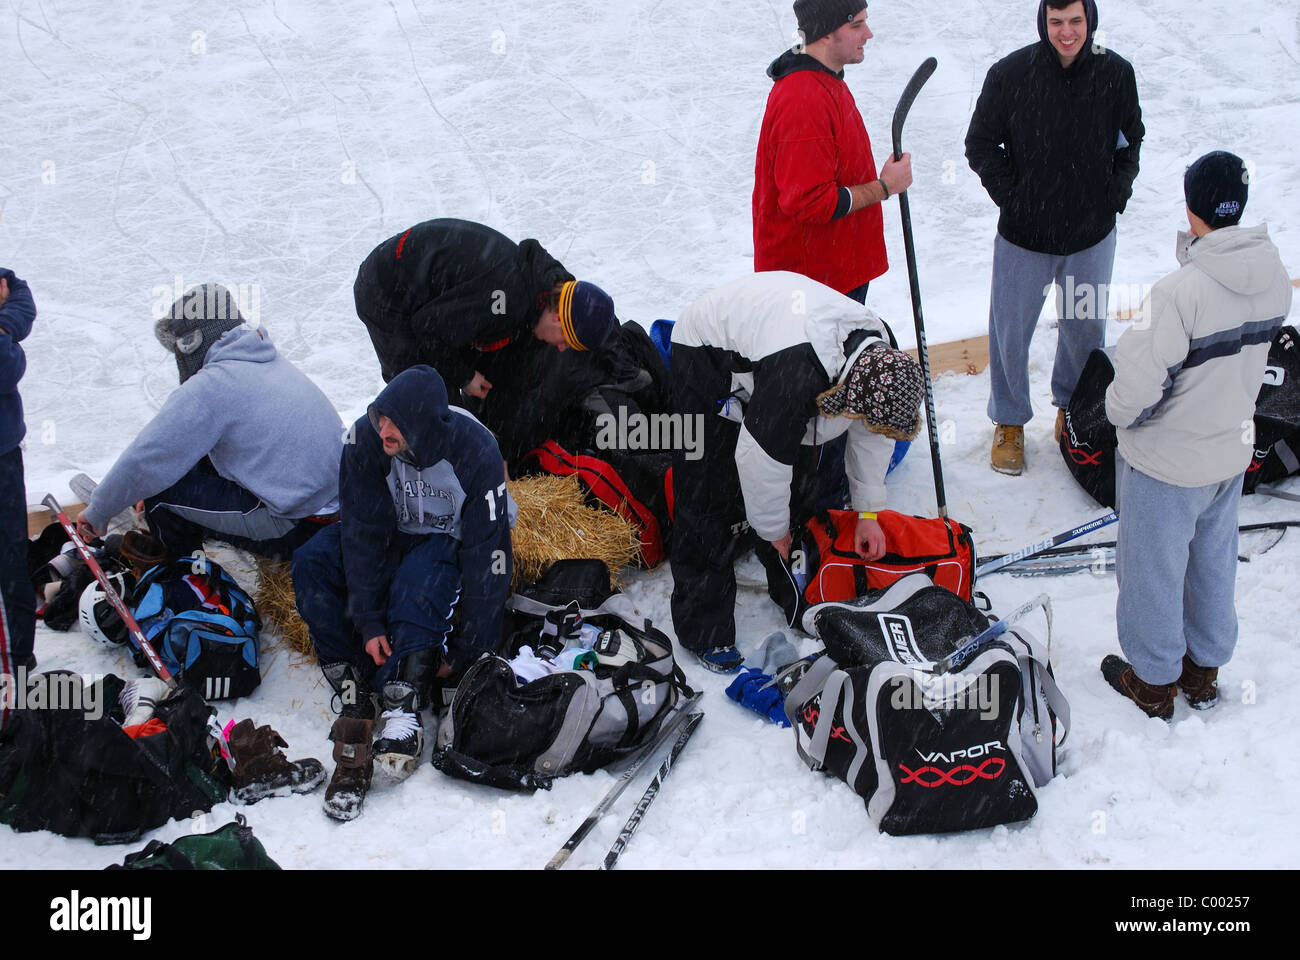 Teams arrive at ice hockey rinks for tournament play on the Erie Canal in Fairport, NY Stock Photo